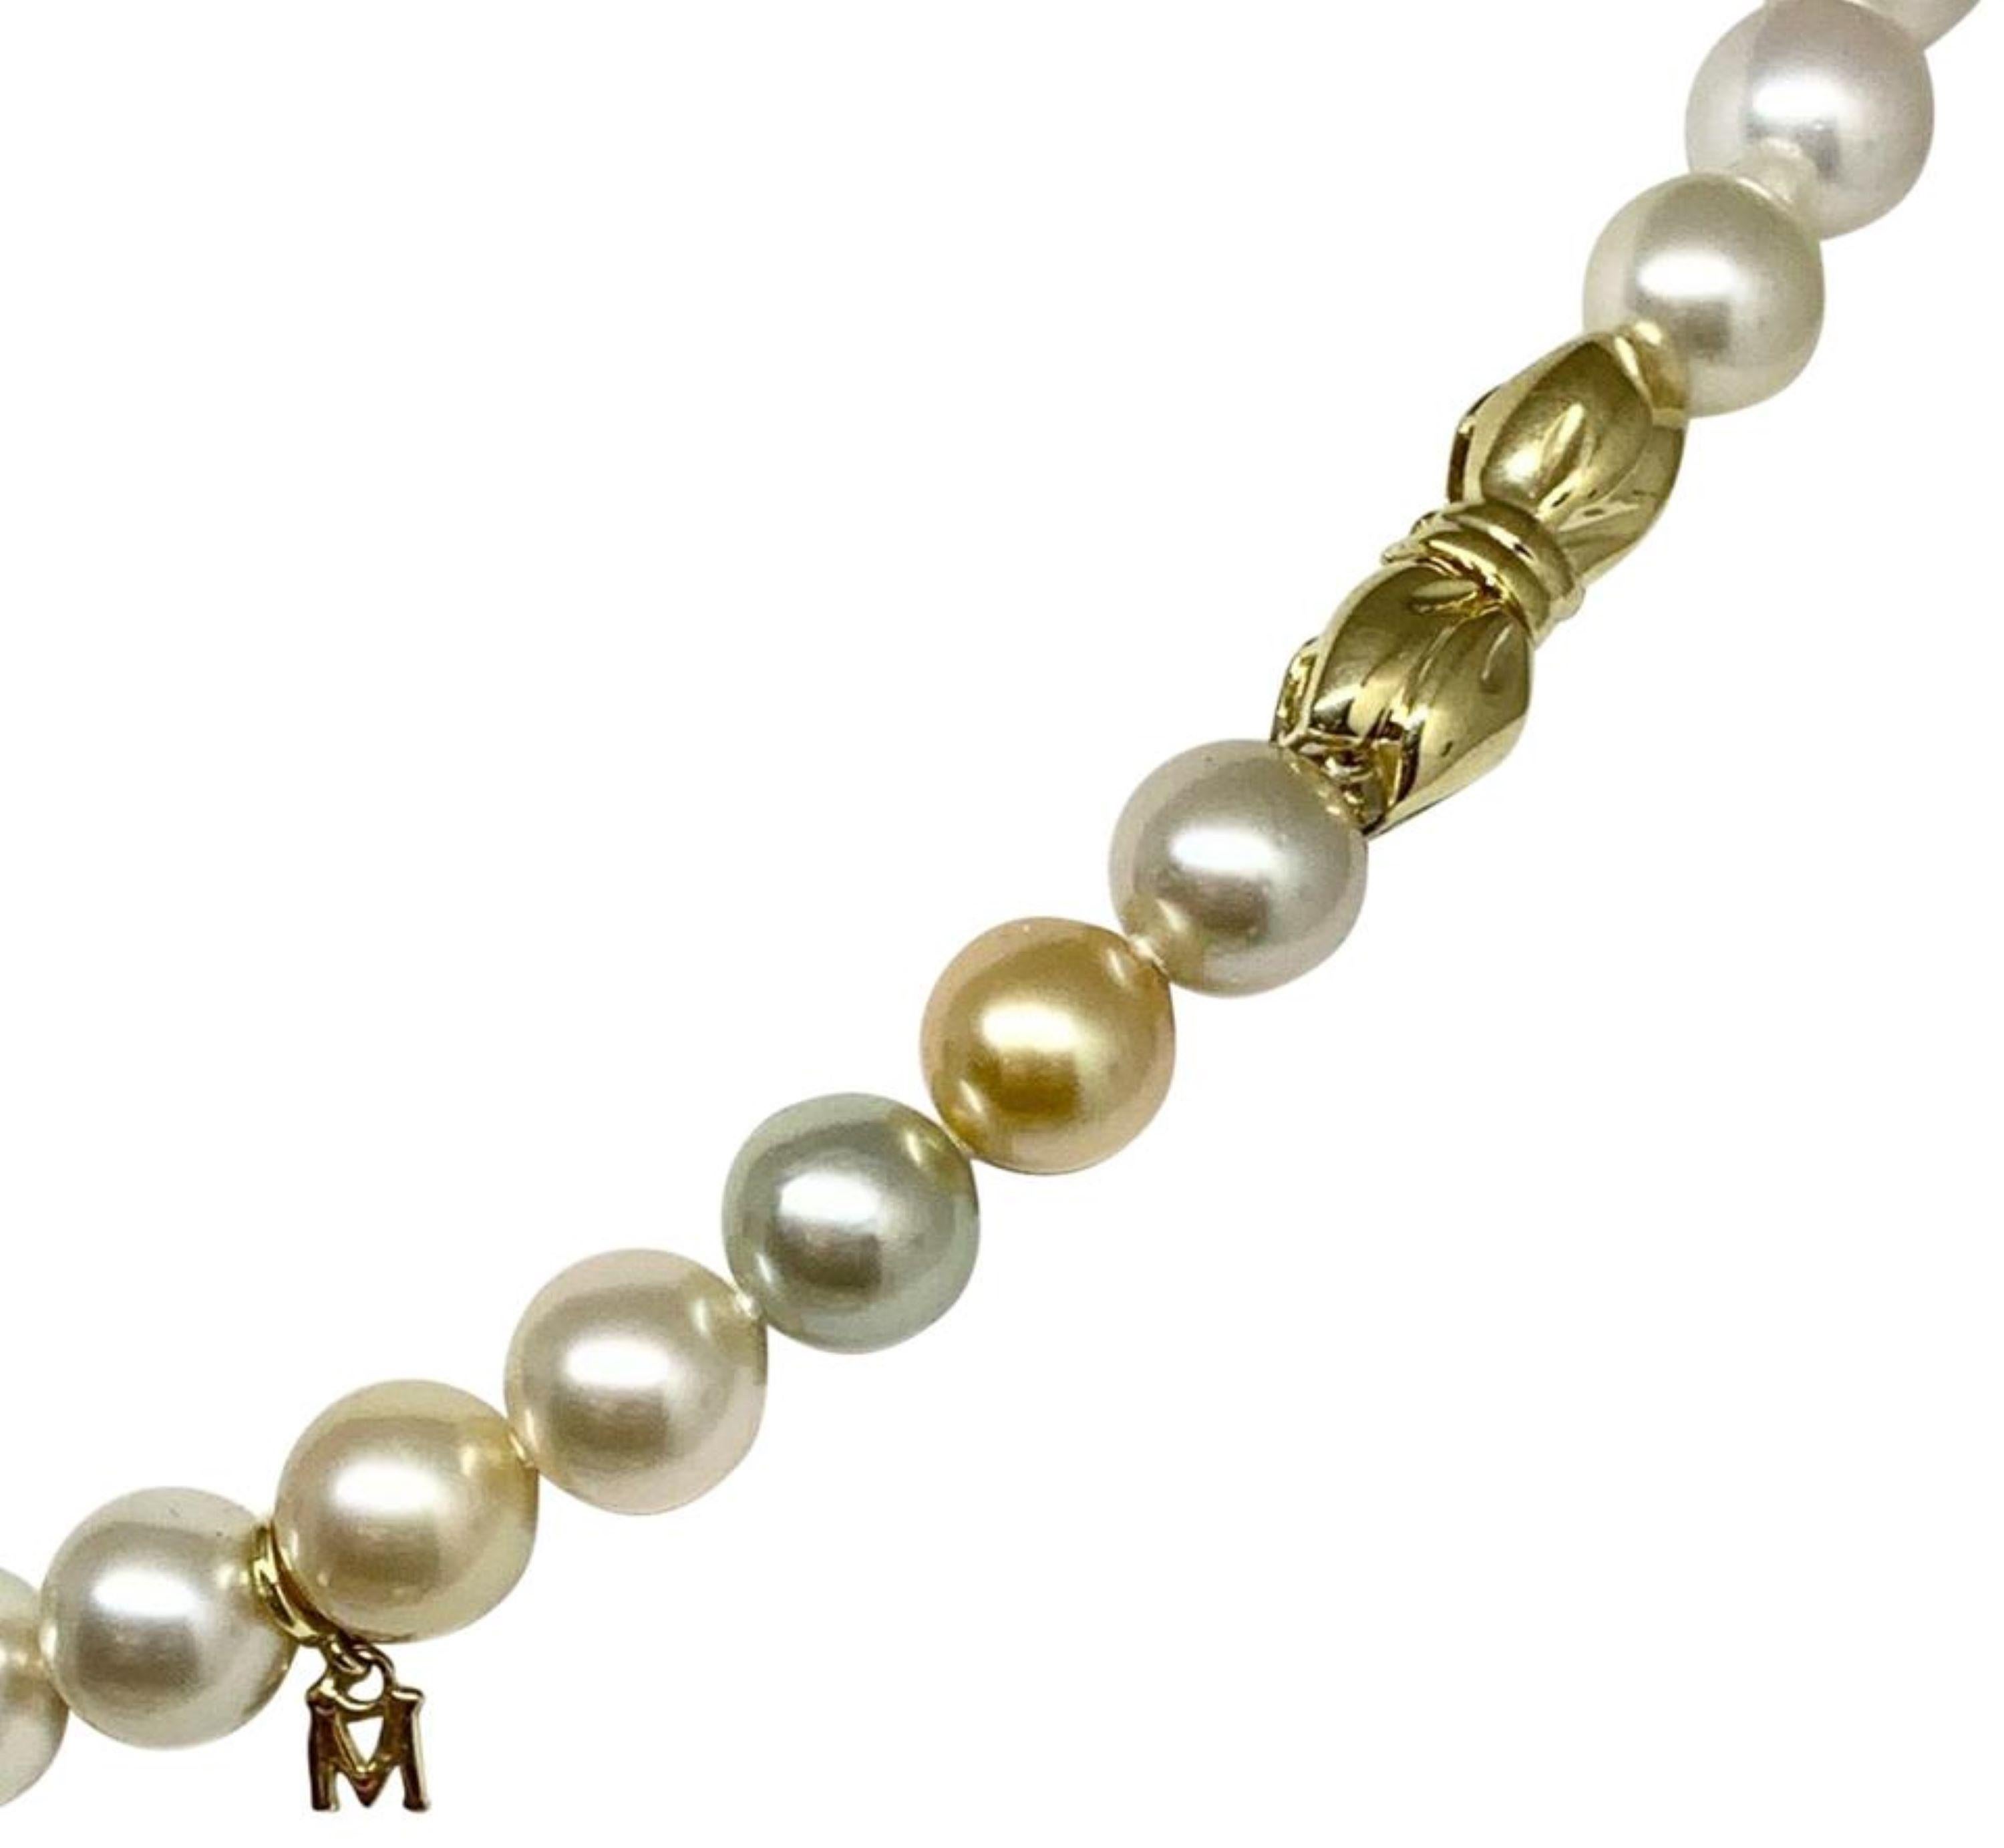 Certified $25,000 Estate Mikimoto 10.00-9.30 MM Ladys South Sea Pearl Necklace.

Nothing says, “I Love ❤️ you” more than Diamonds and Pearls.

Certified by

Gemological Appraisal Laboratory
Gemological Appraisal Laboratory of America is a proud